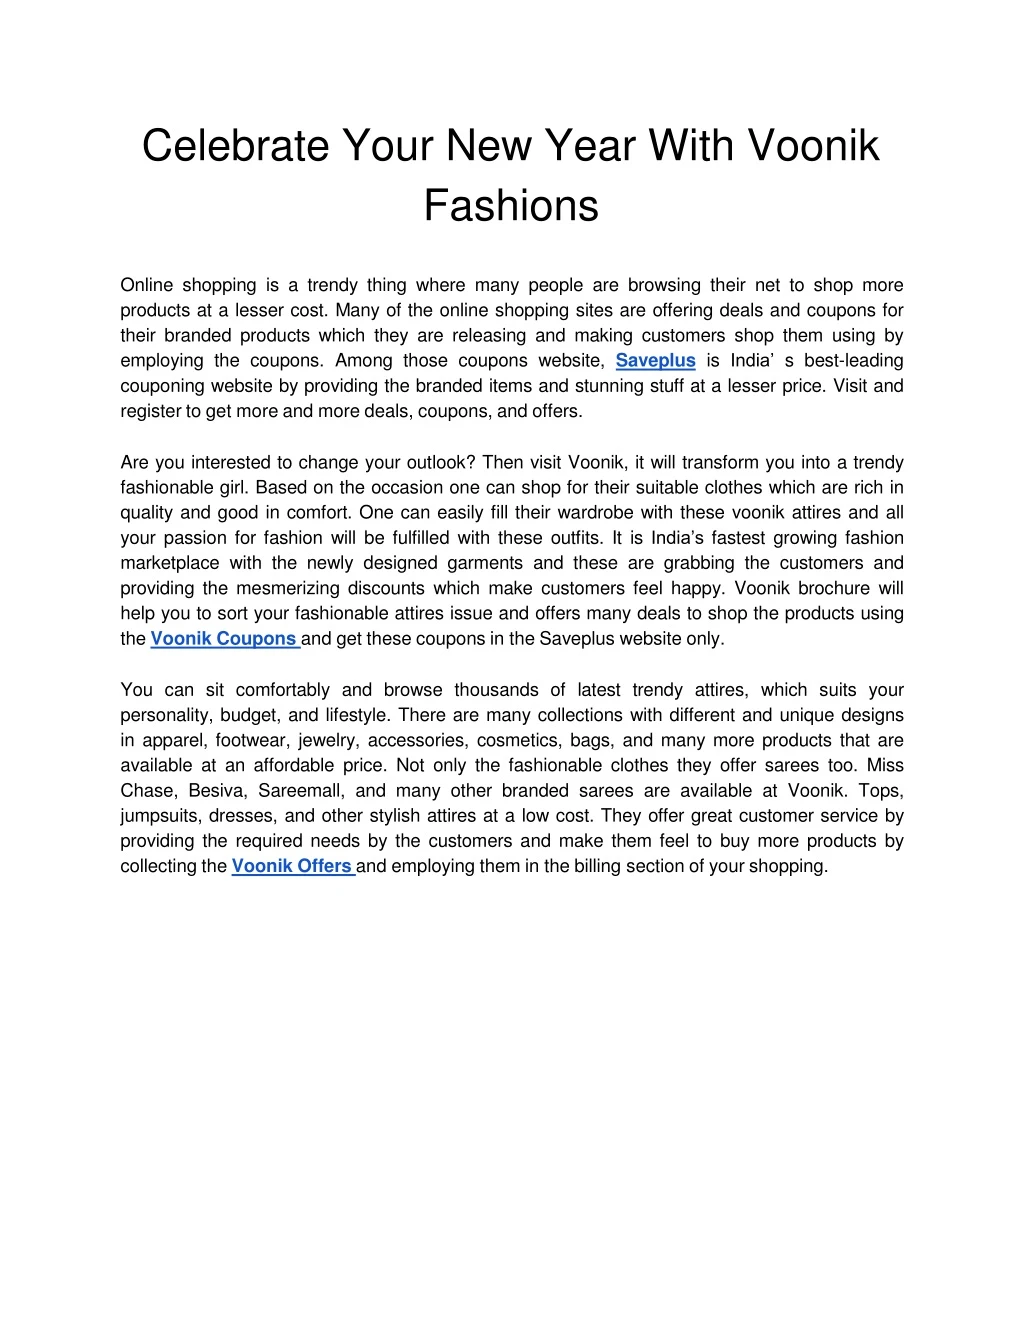 celebrate your new year with voonik fashions